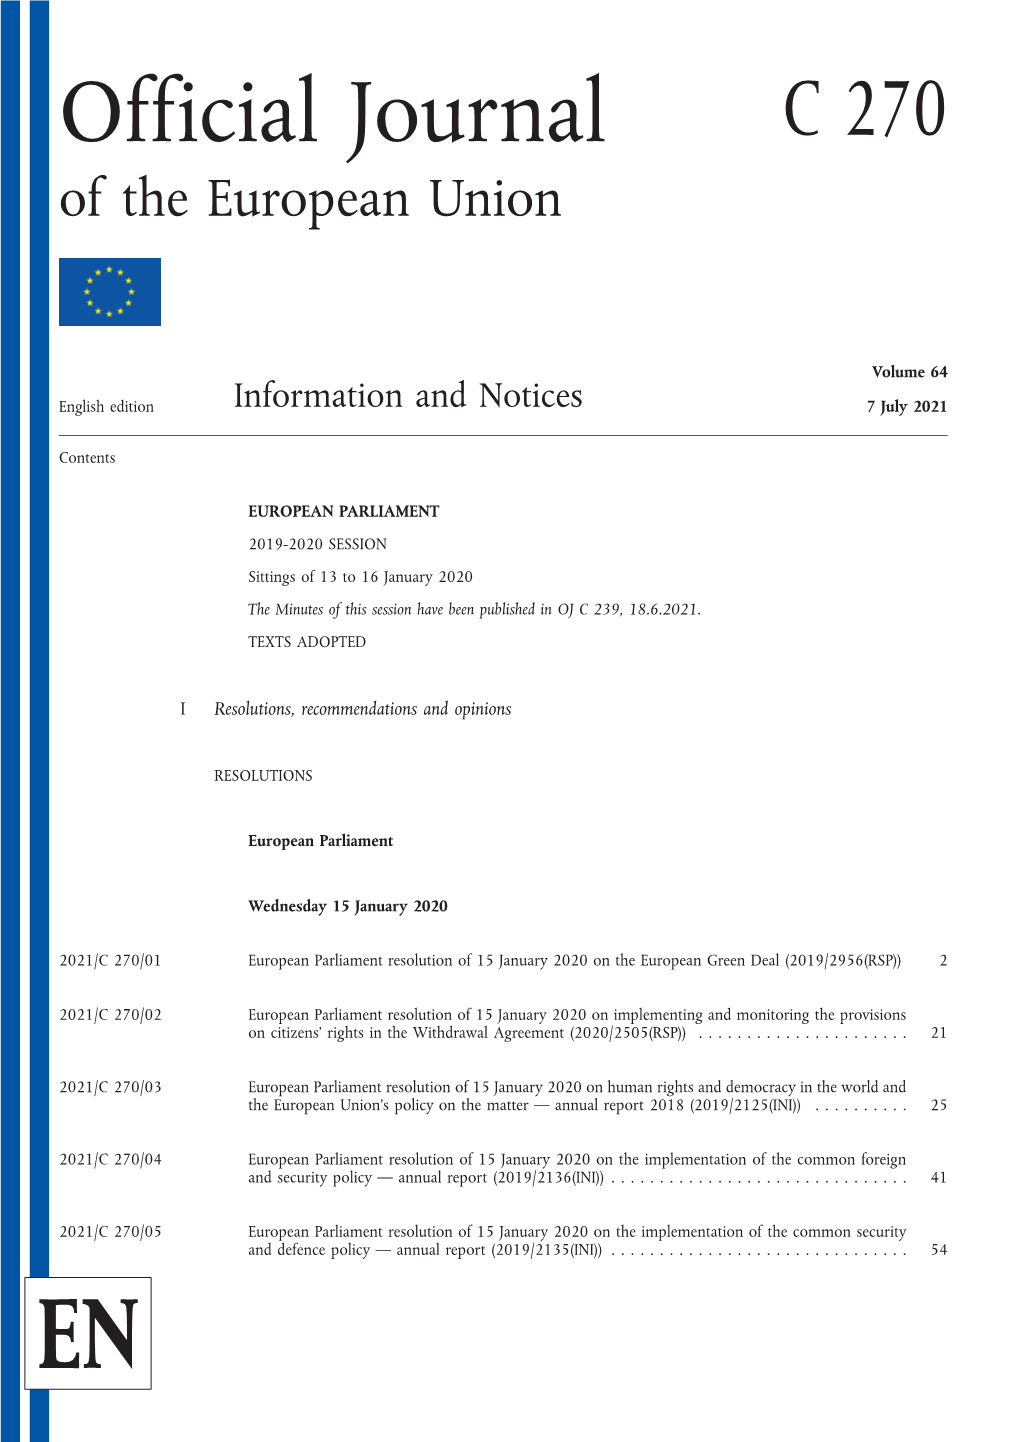 Official Journal of the European Union C 270/1